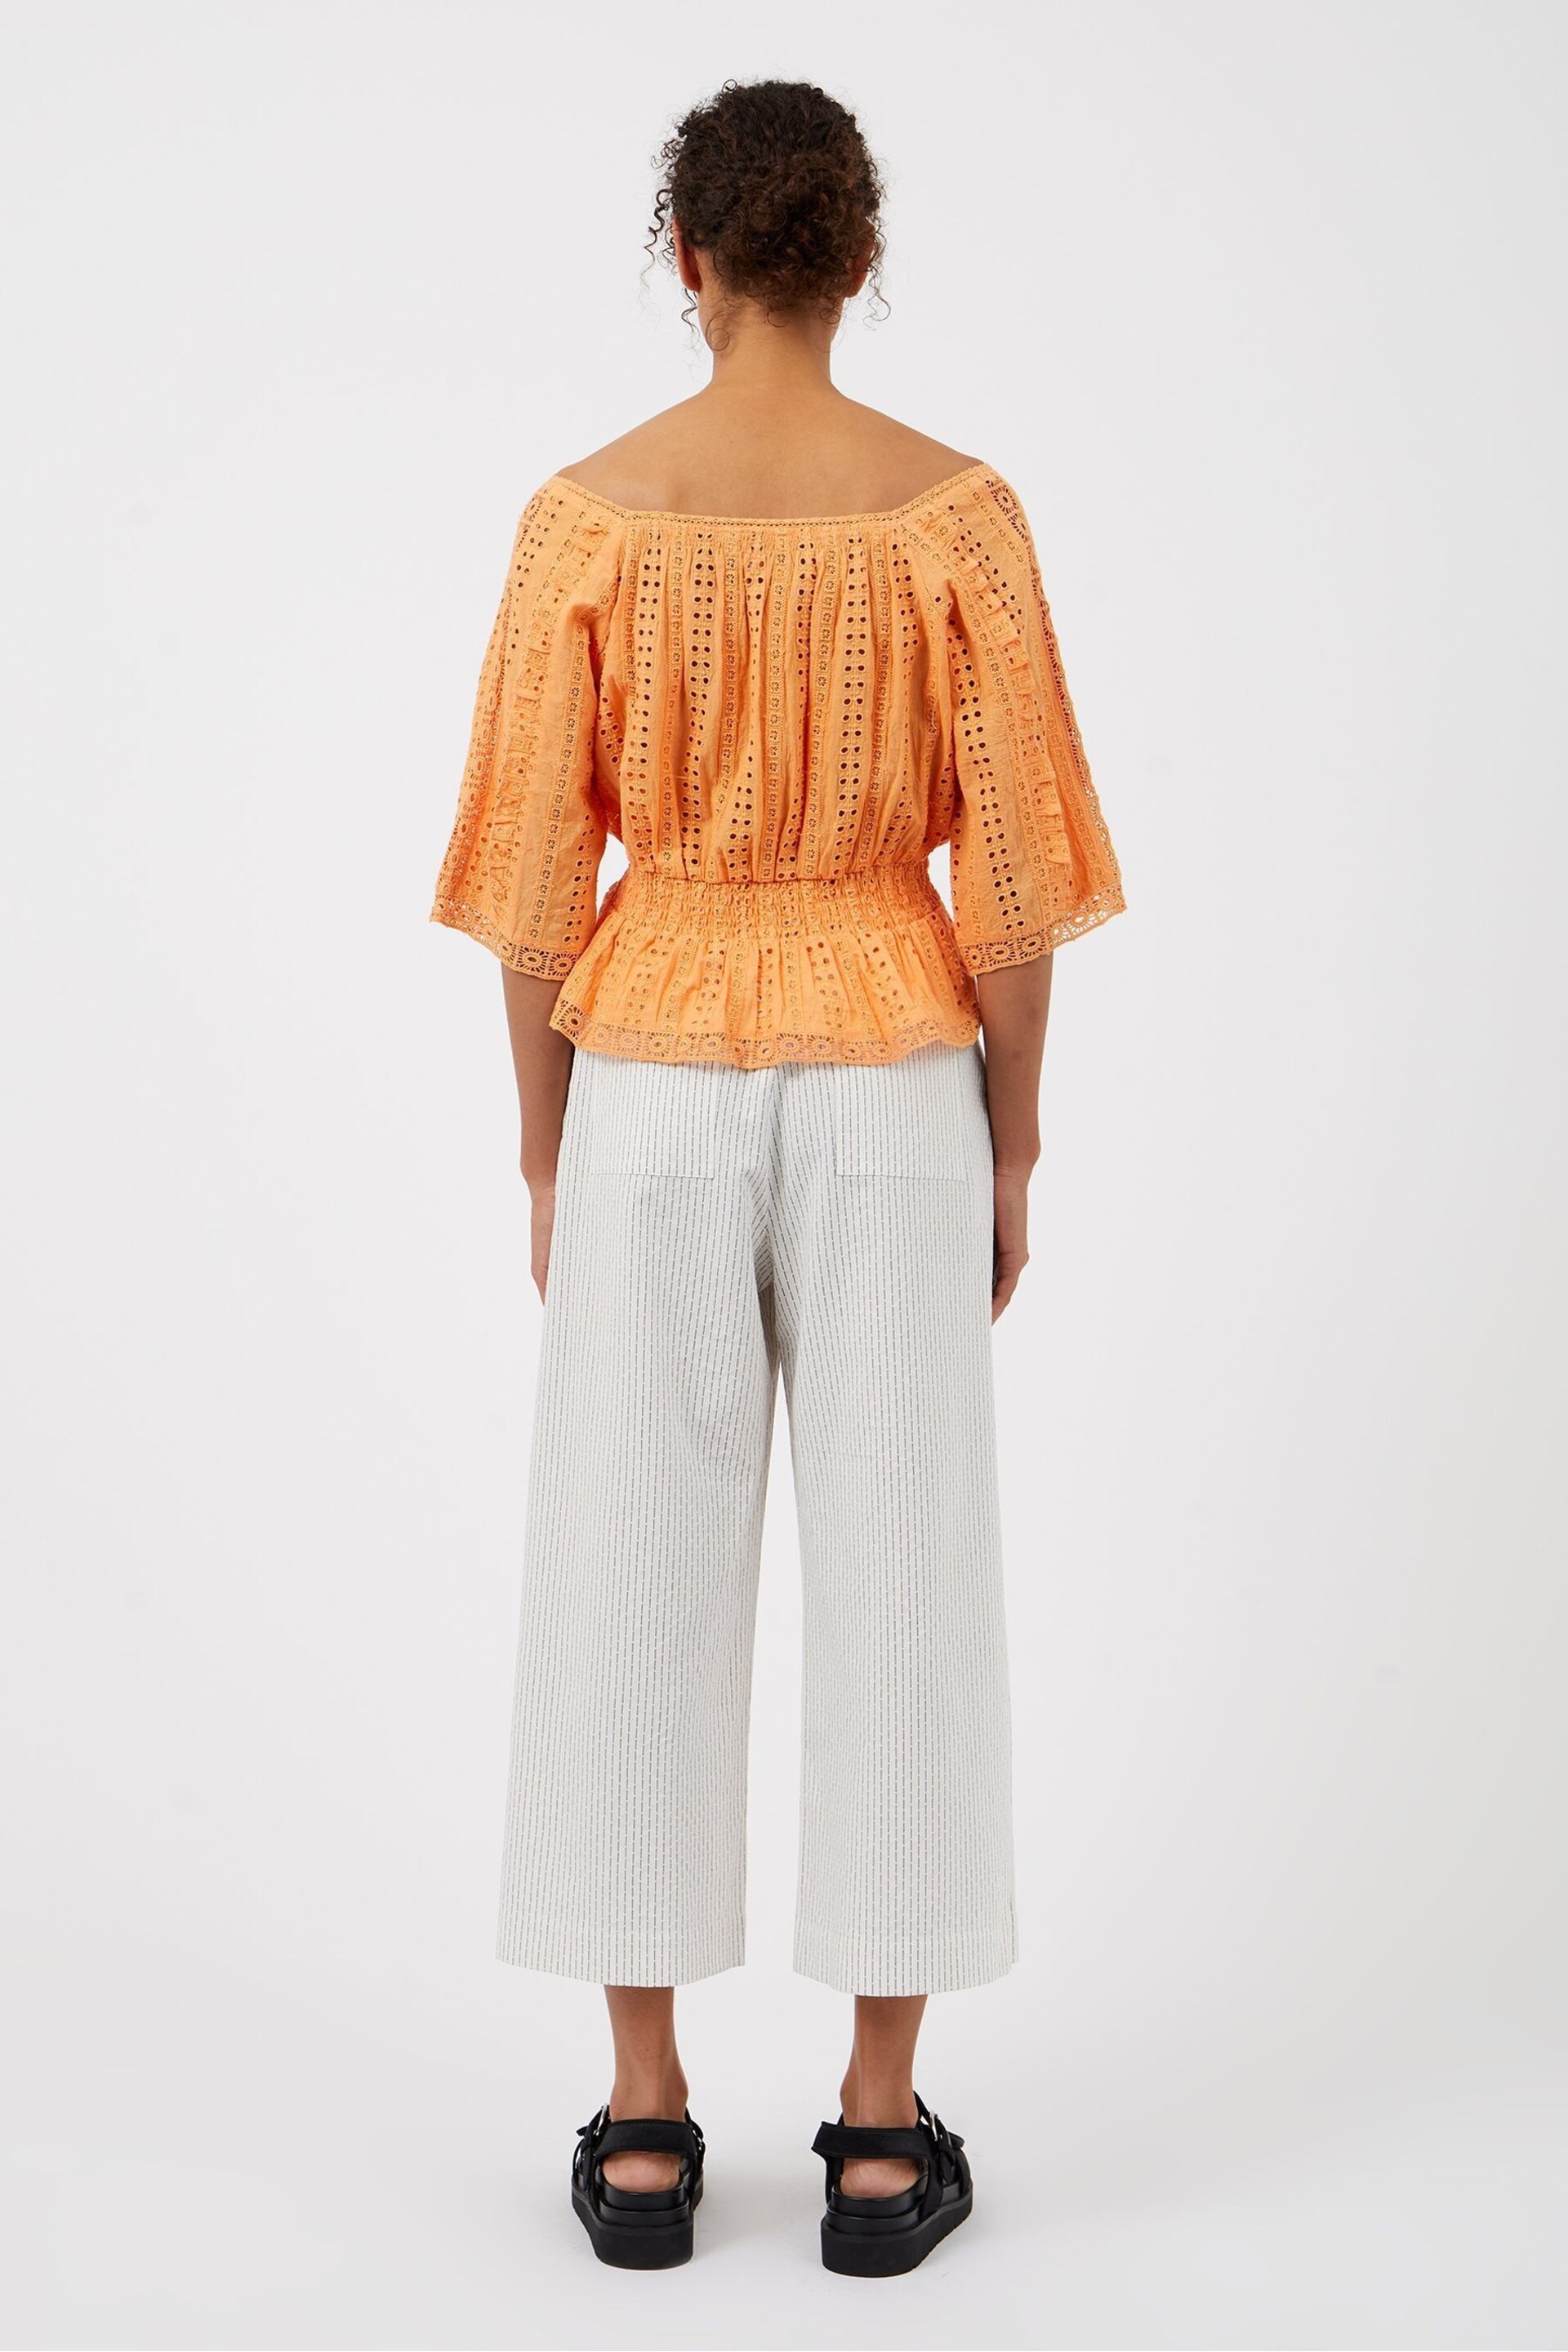 Great Plains Orange Summer Embroidery Square Neck Top - Image 3 of 4